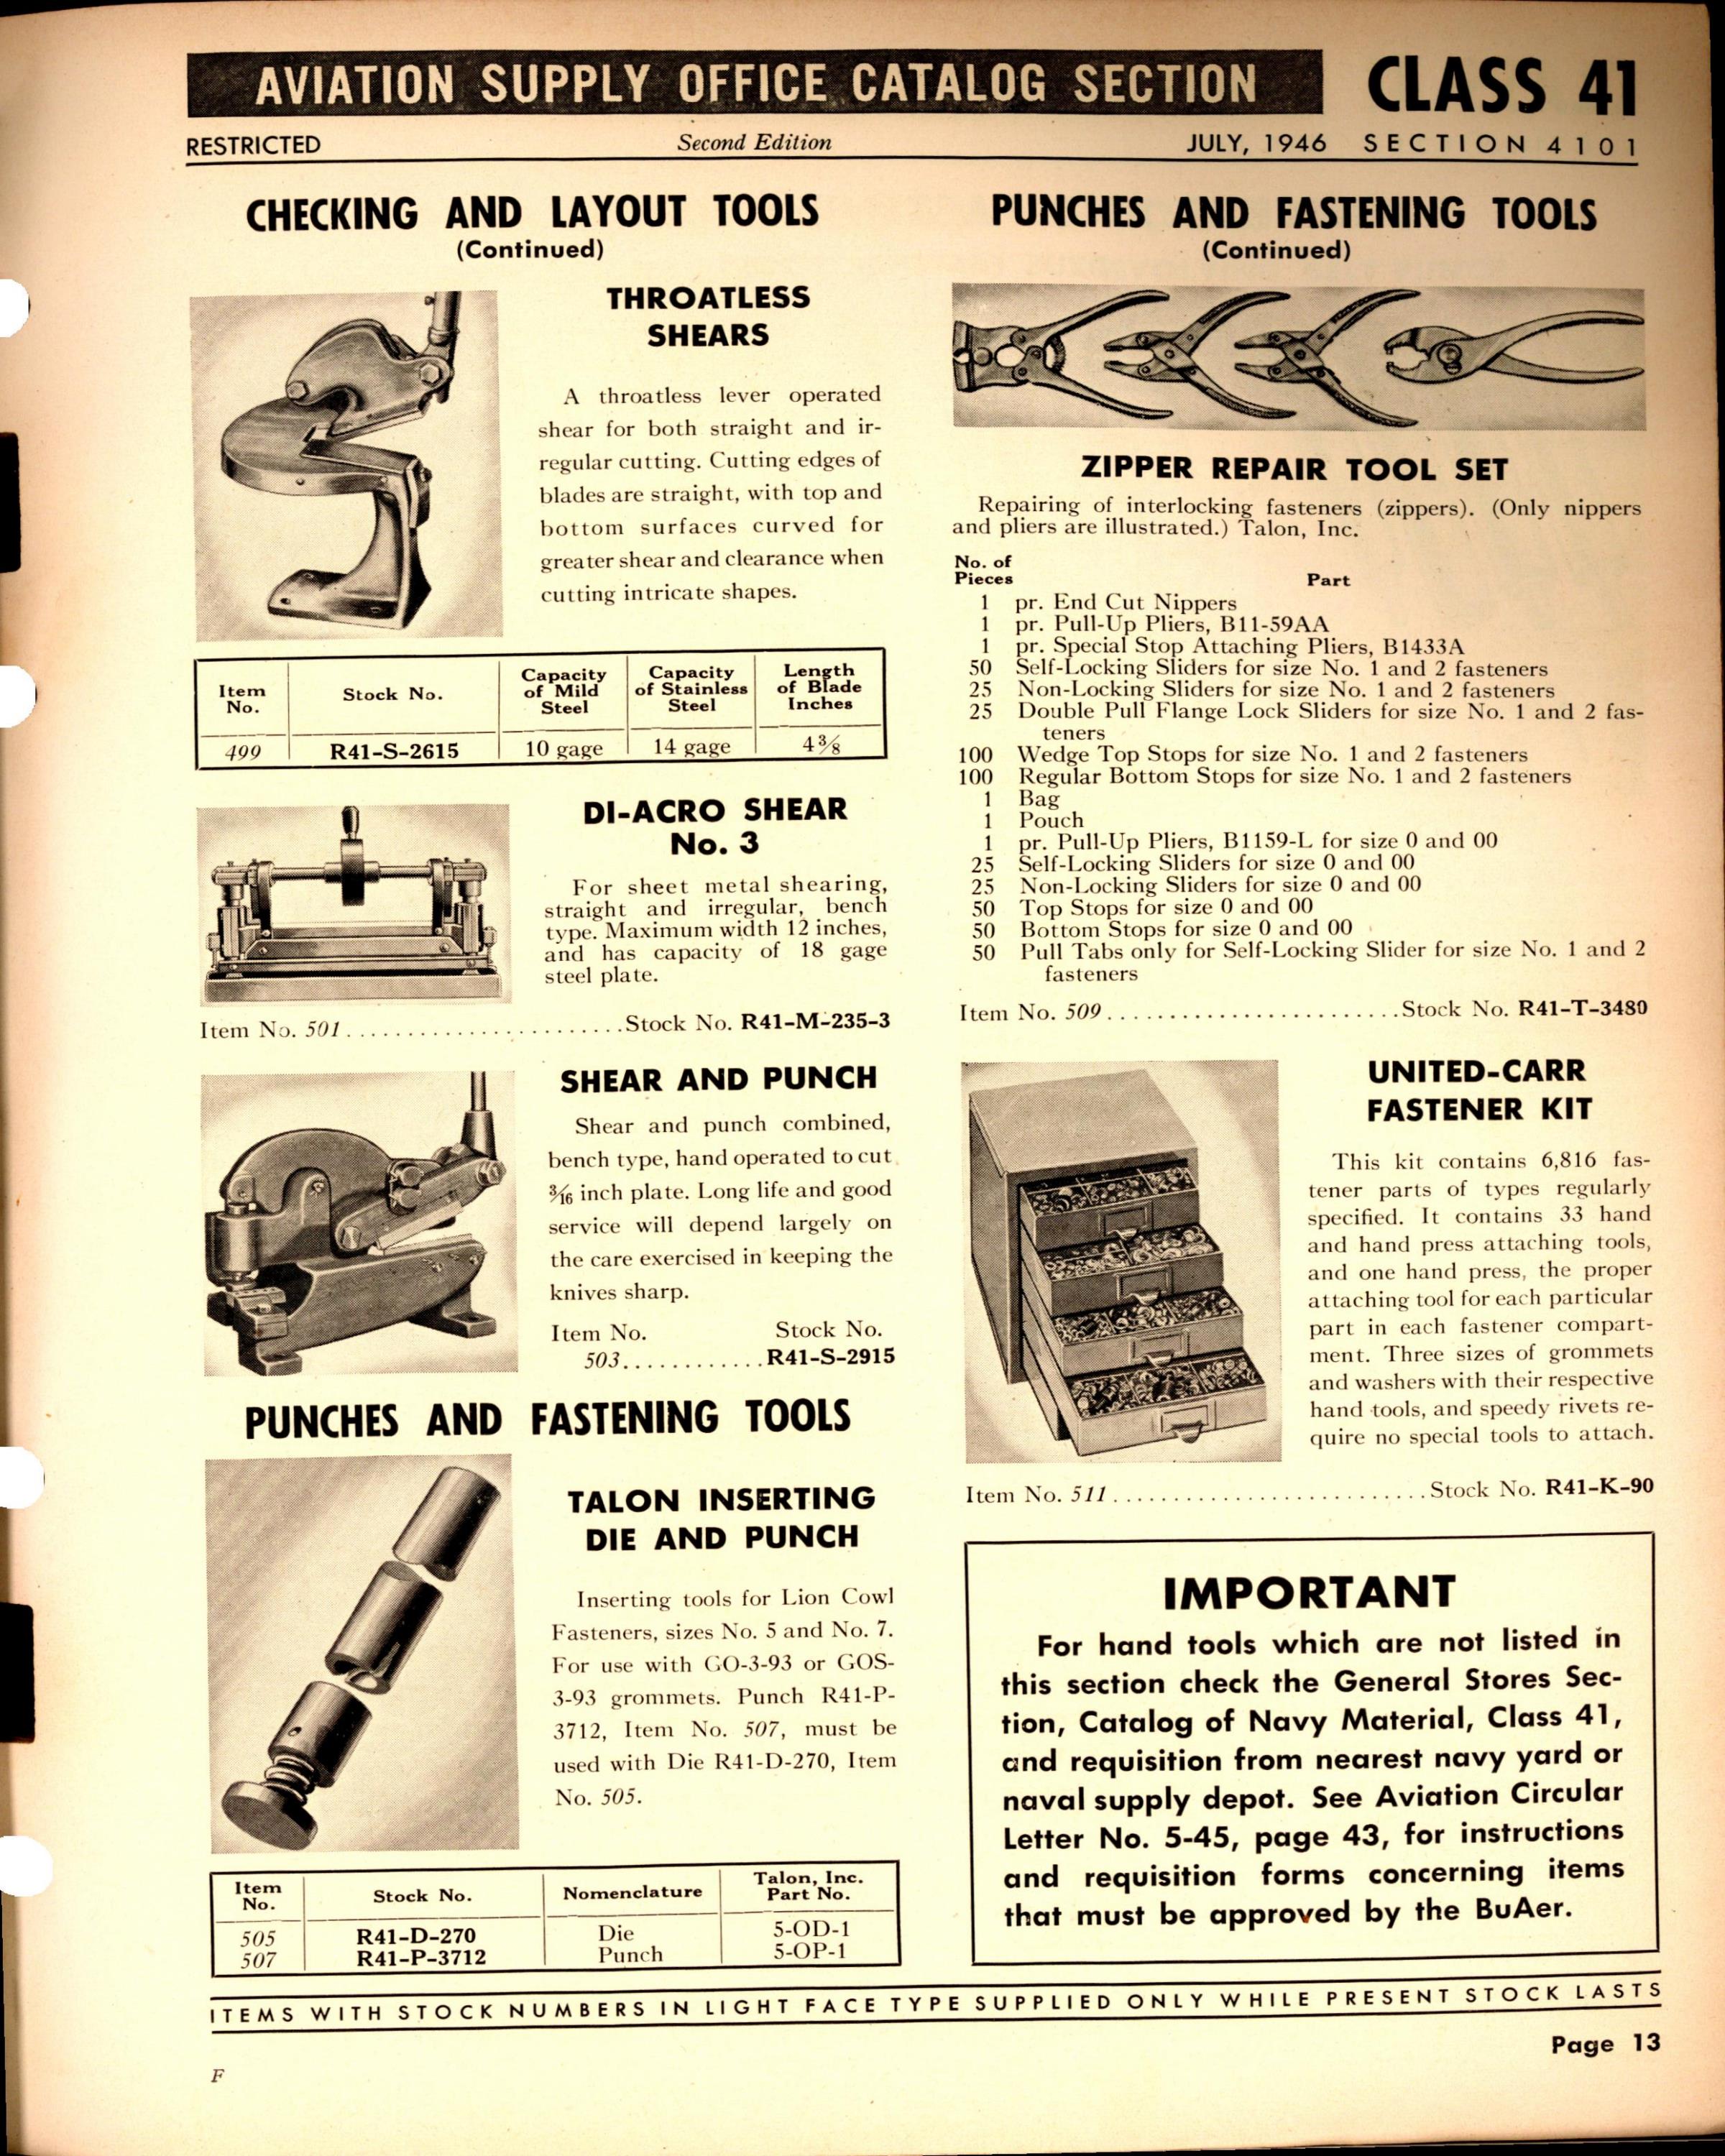 Sample page 13 from AirCorps Library document: Hand Tools